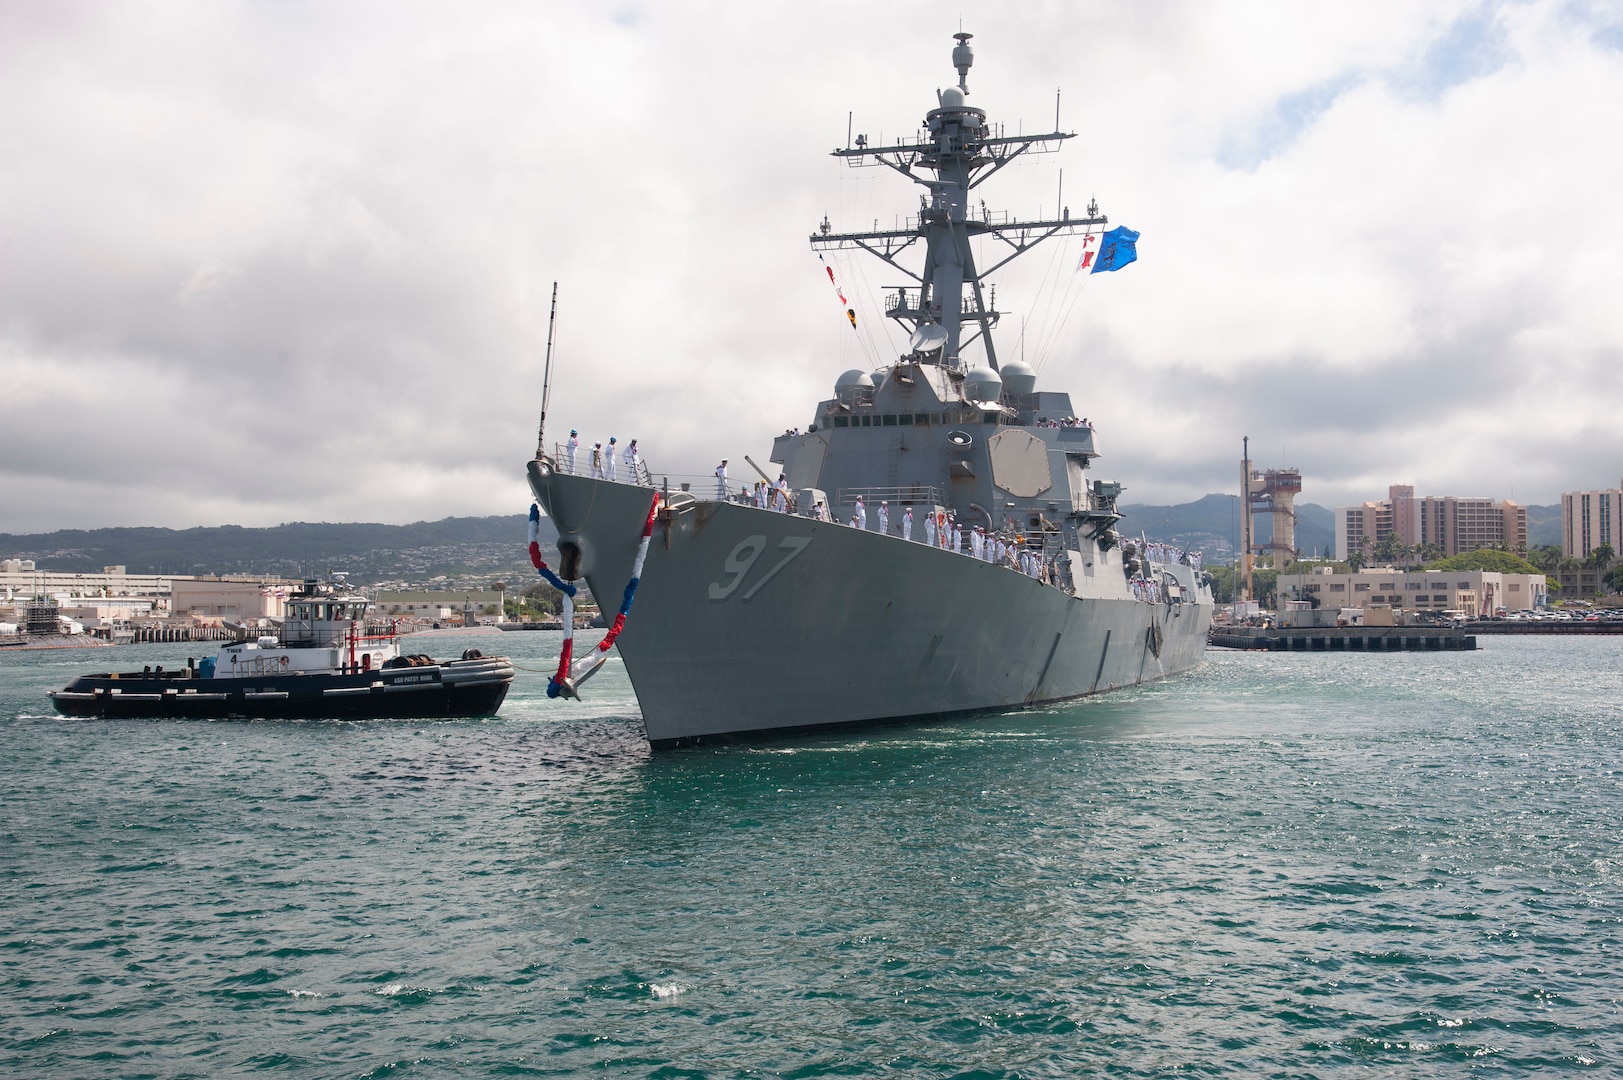 USS Halsey returns to Pearl Harbor after deployment